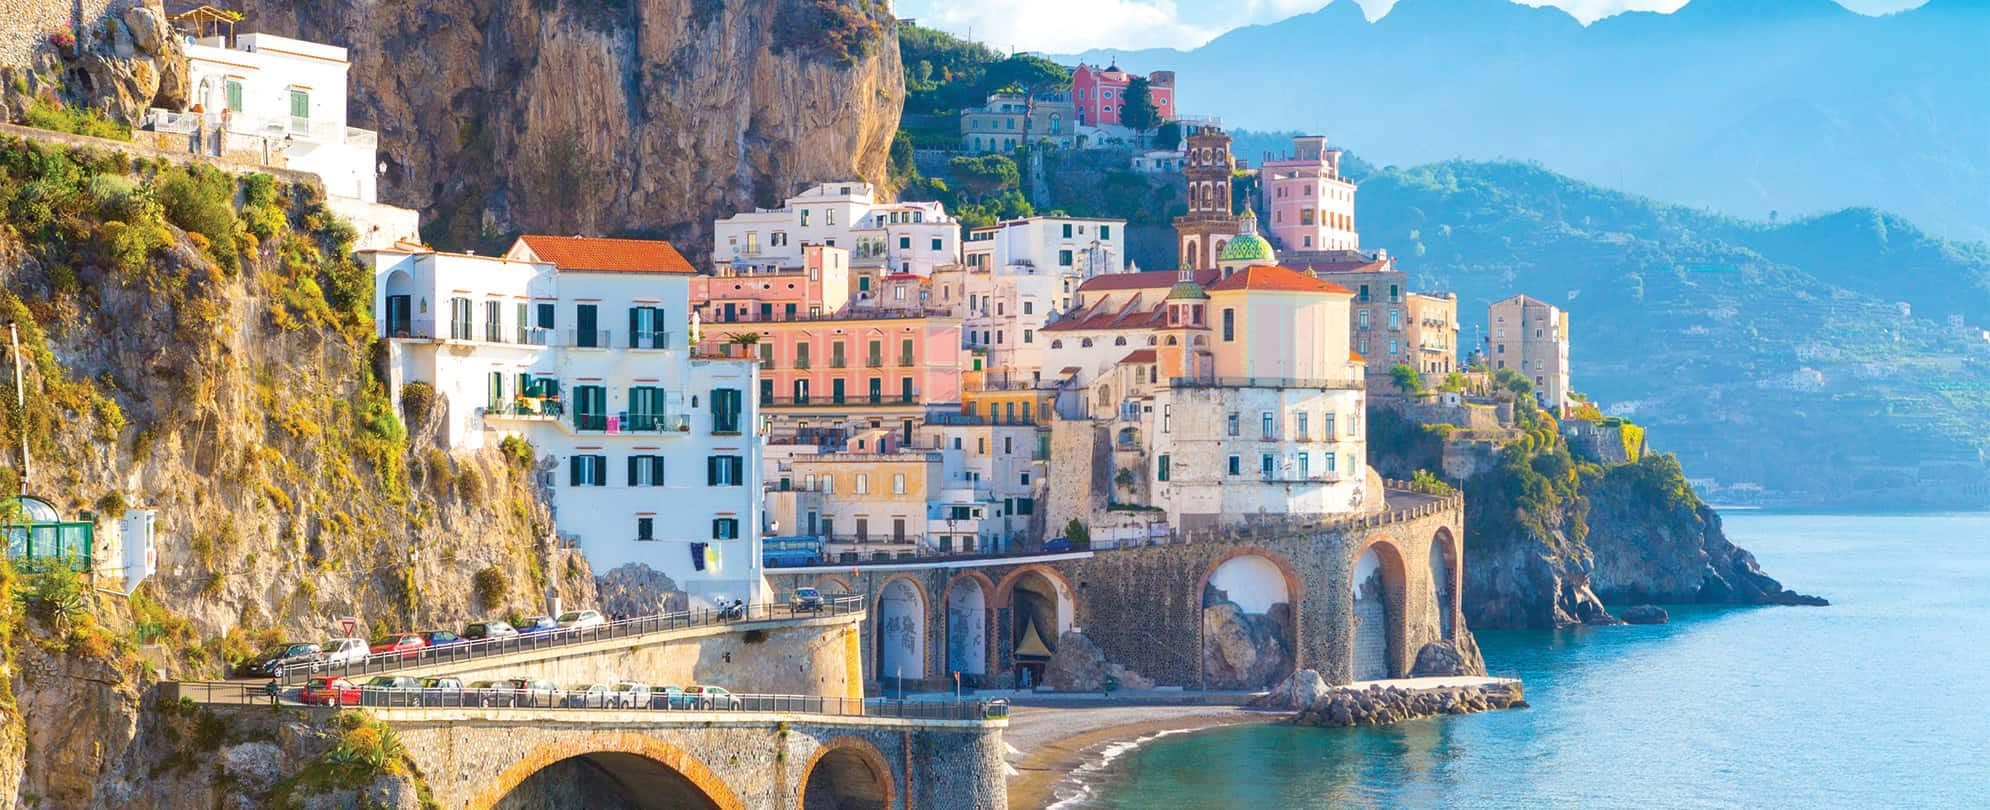 Italy's Amalfi Coast, with colorful buildings and roadway built into the waterfront mountainside.